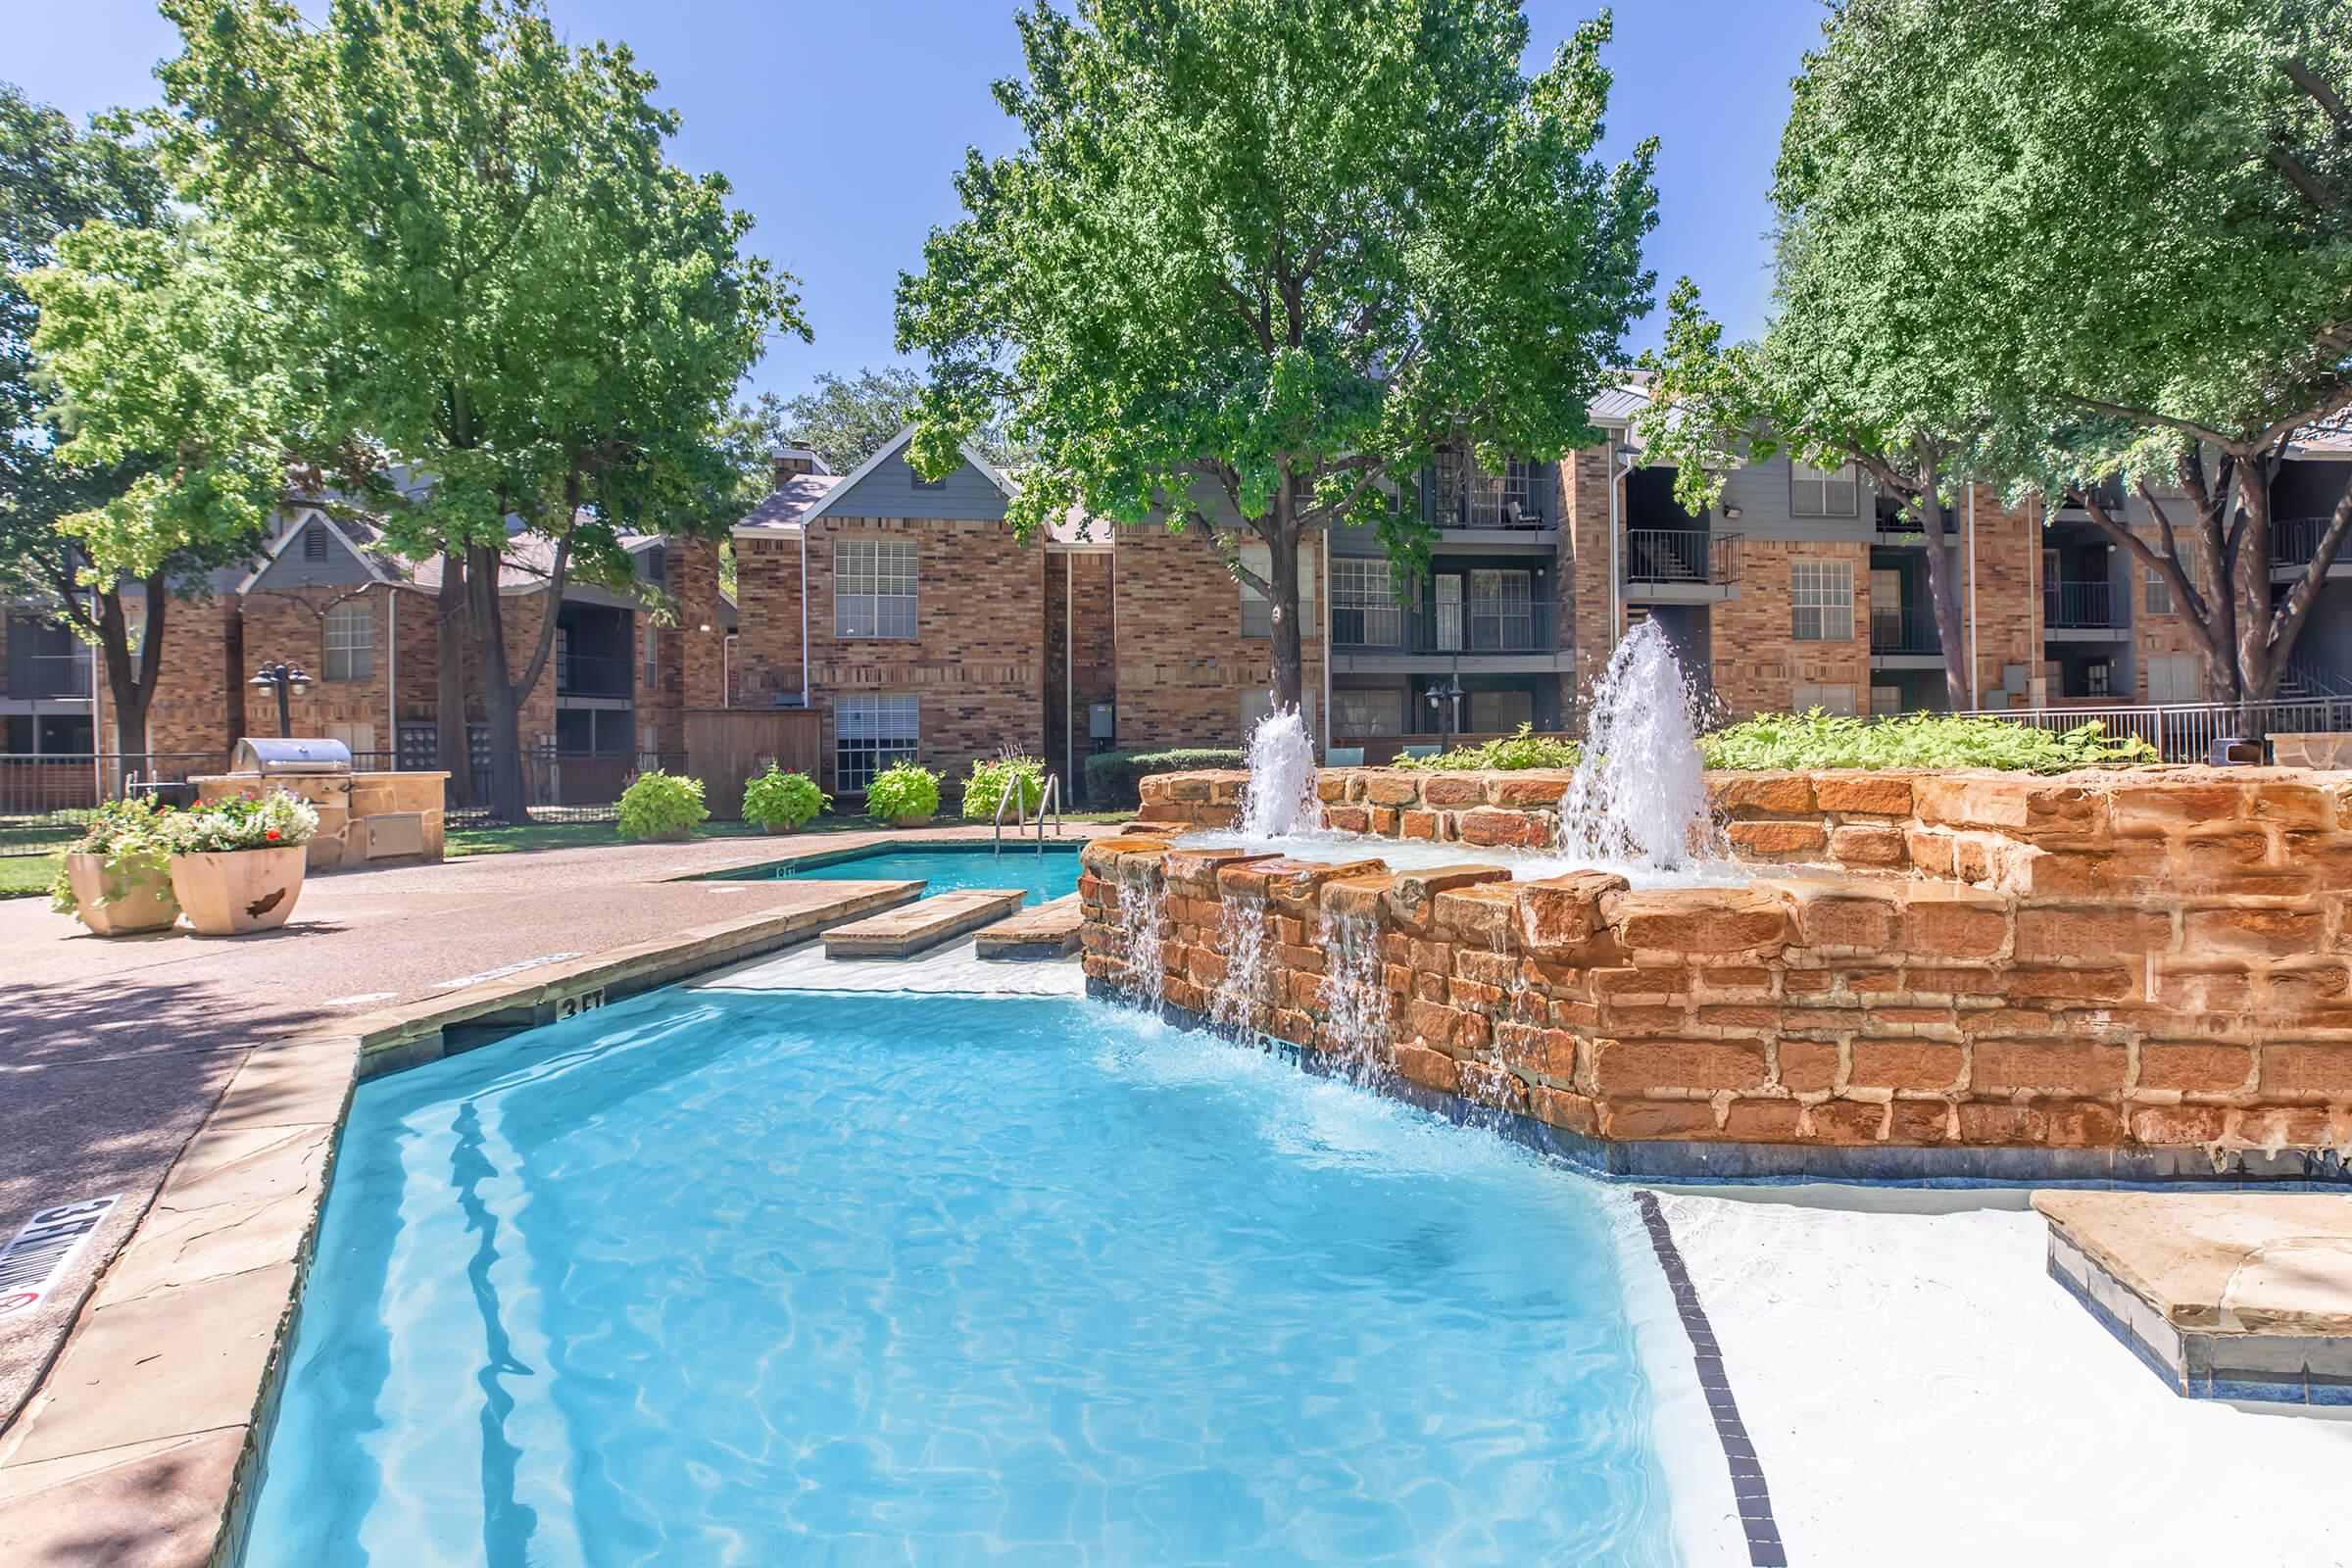 a pool next to a brick building